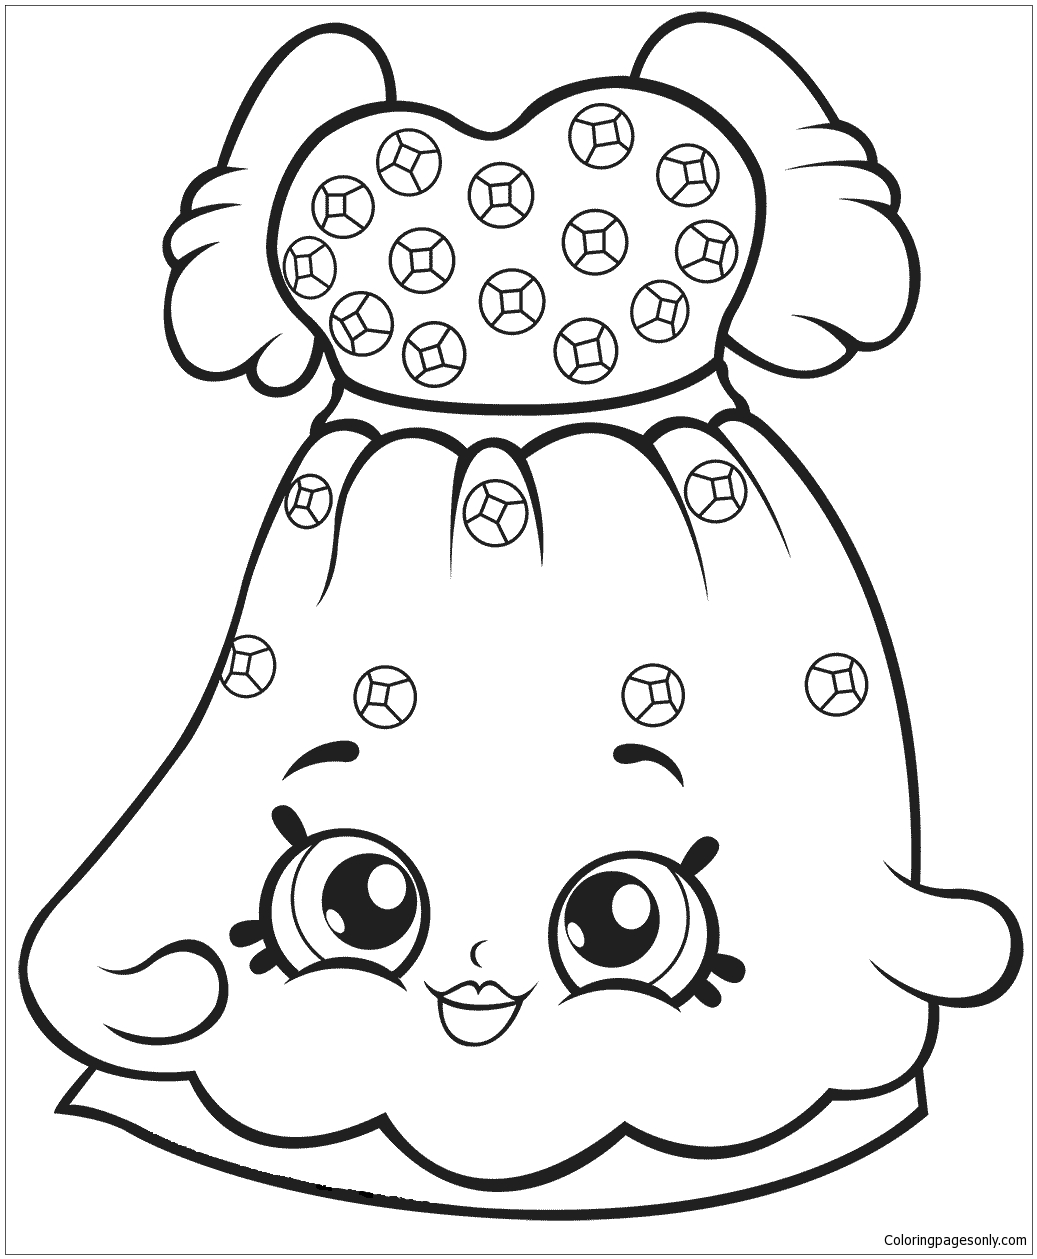 Shopkins Cute Coloring Pages